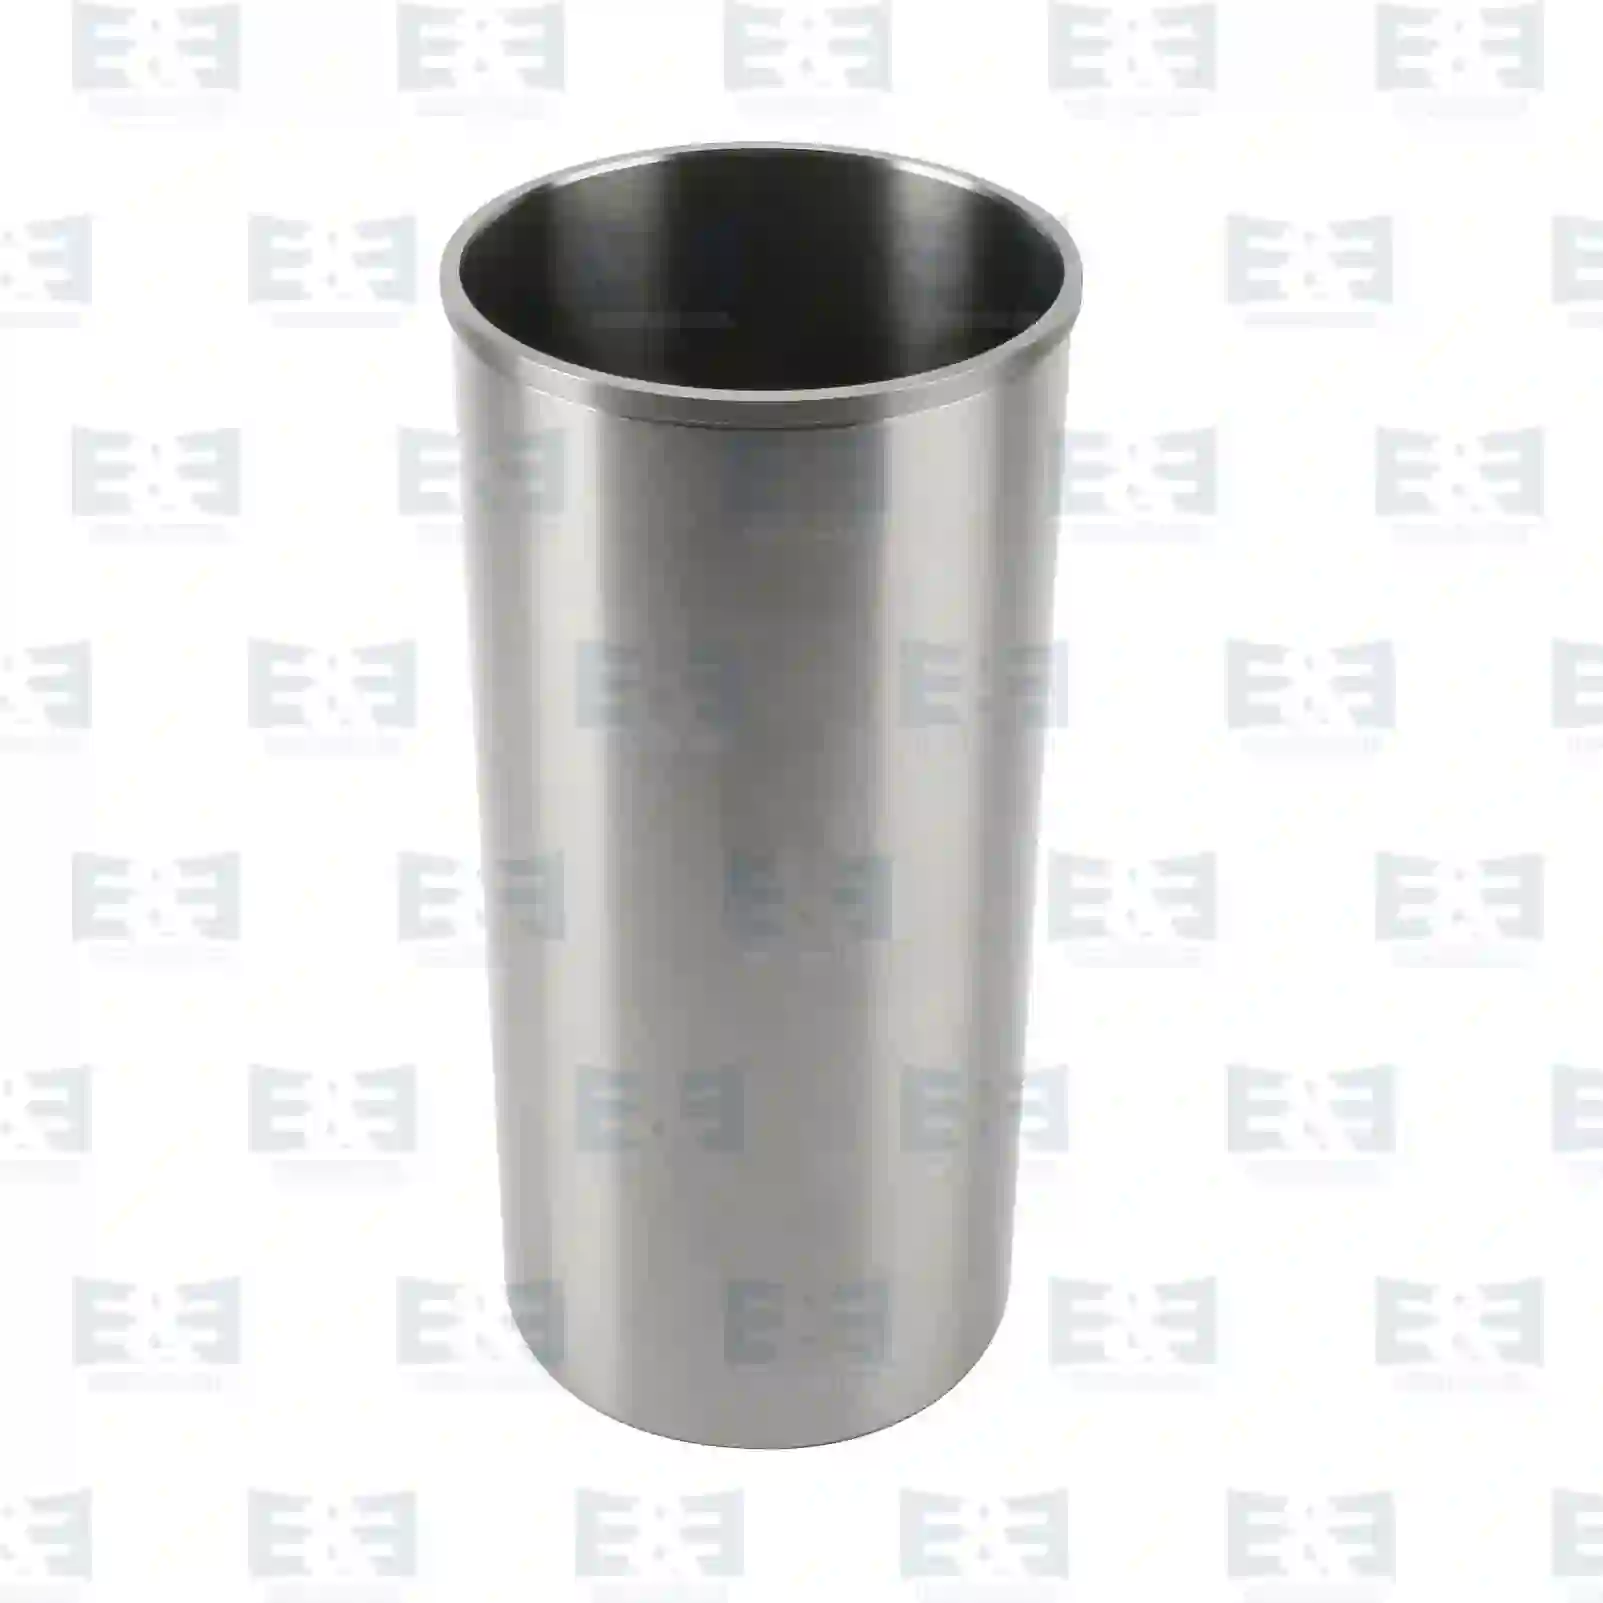 Cylinder liner, without seal rings, 2E2200374, 3550110410, 3550110710, 3550110810, 3550110816 ||  2E2200374 E&E Truck Spare Parts | Truck Spare Parts, Auotomotive Spare Parts Cylinder liner, without seal rings, 2E2200374, 3550110410, 3550110710, 3550110810, 3550110816 ||  2E2200374 E&E Truck Spare Parts | Truck Spare Parts, Auotomotive Spare Parts